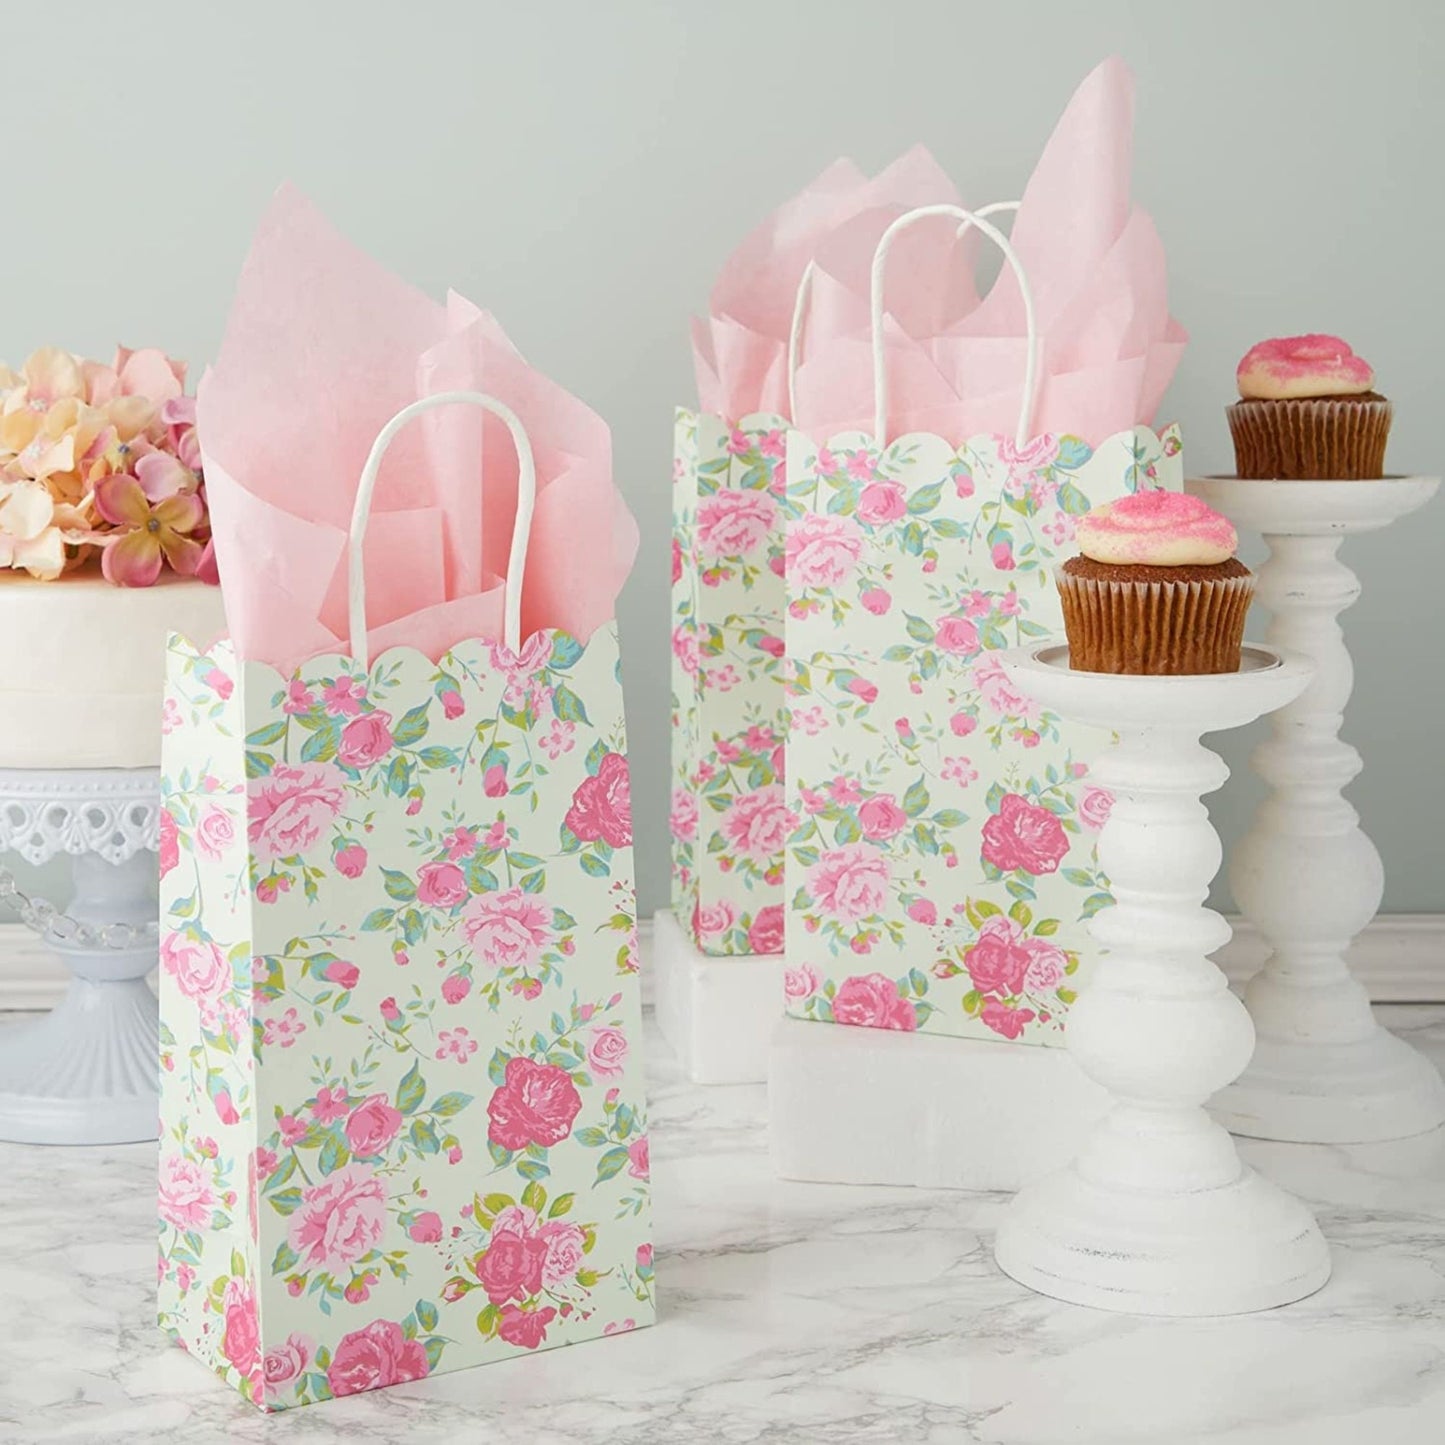 Set of 12 Floral Favor Bags and Boxes